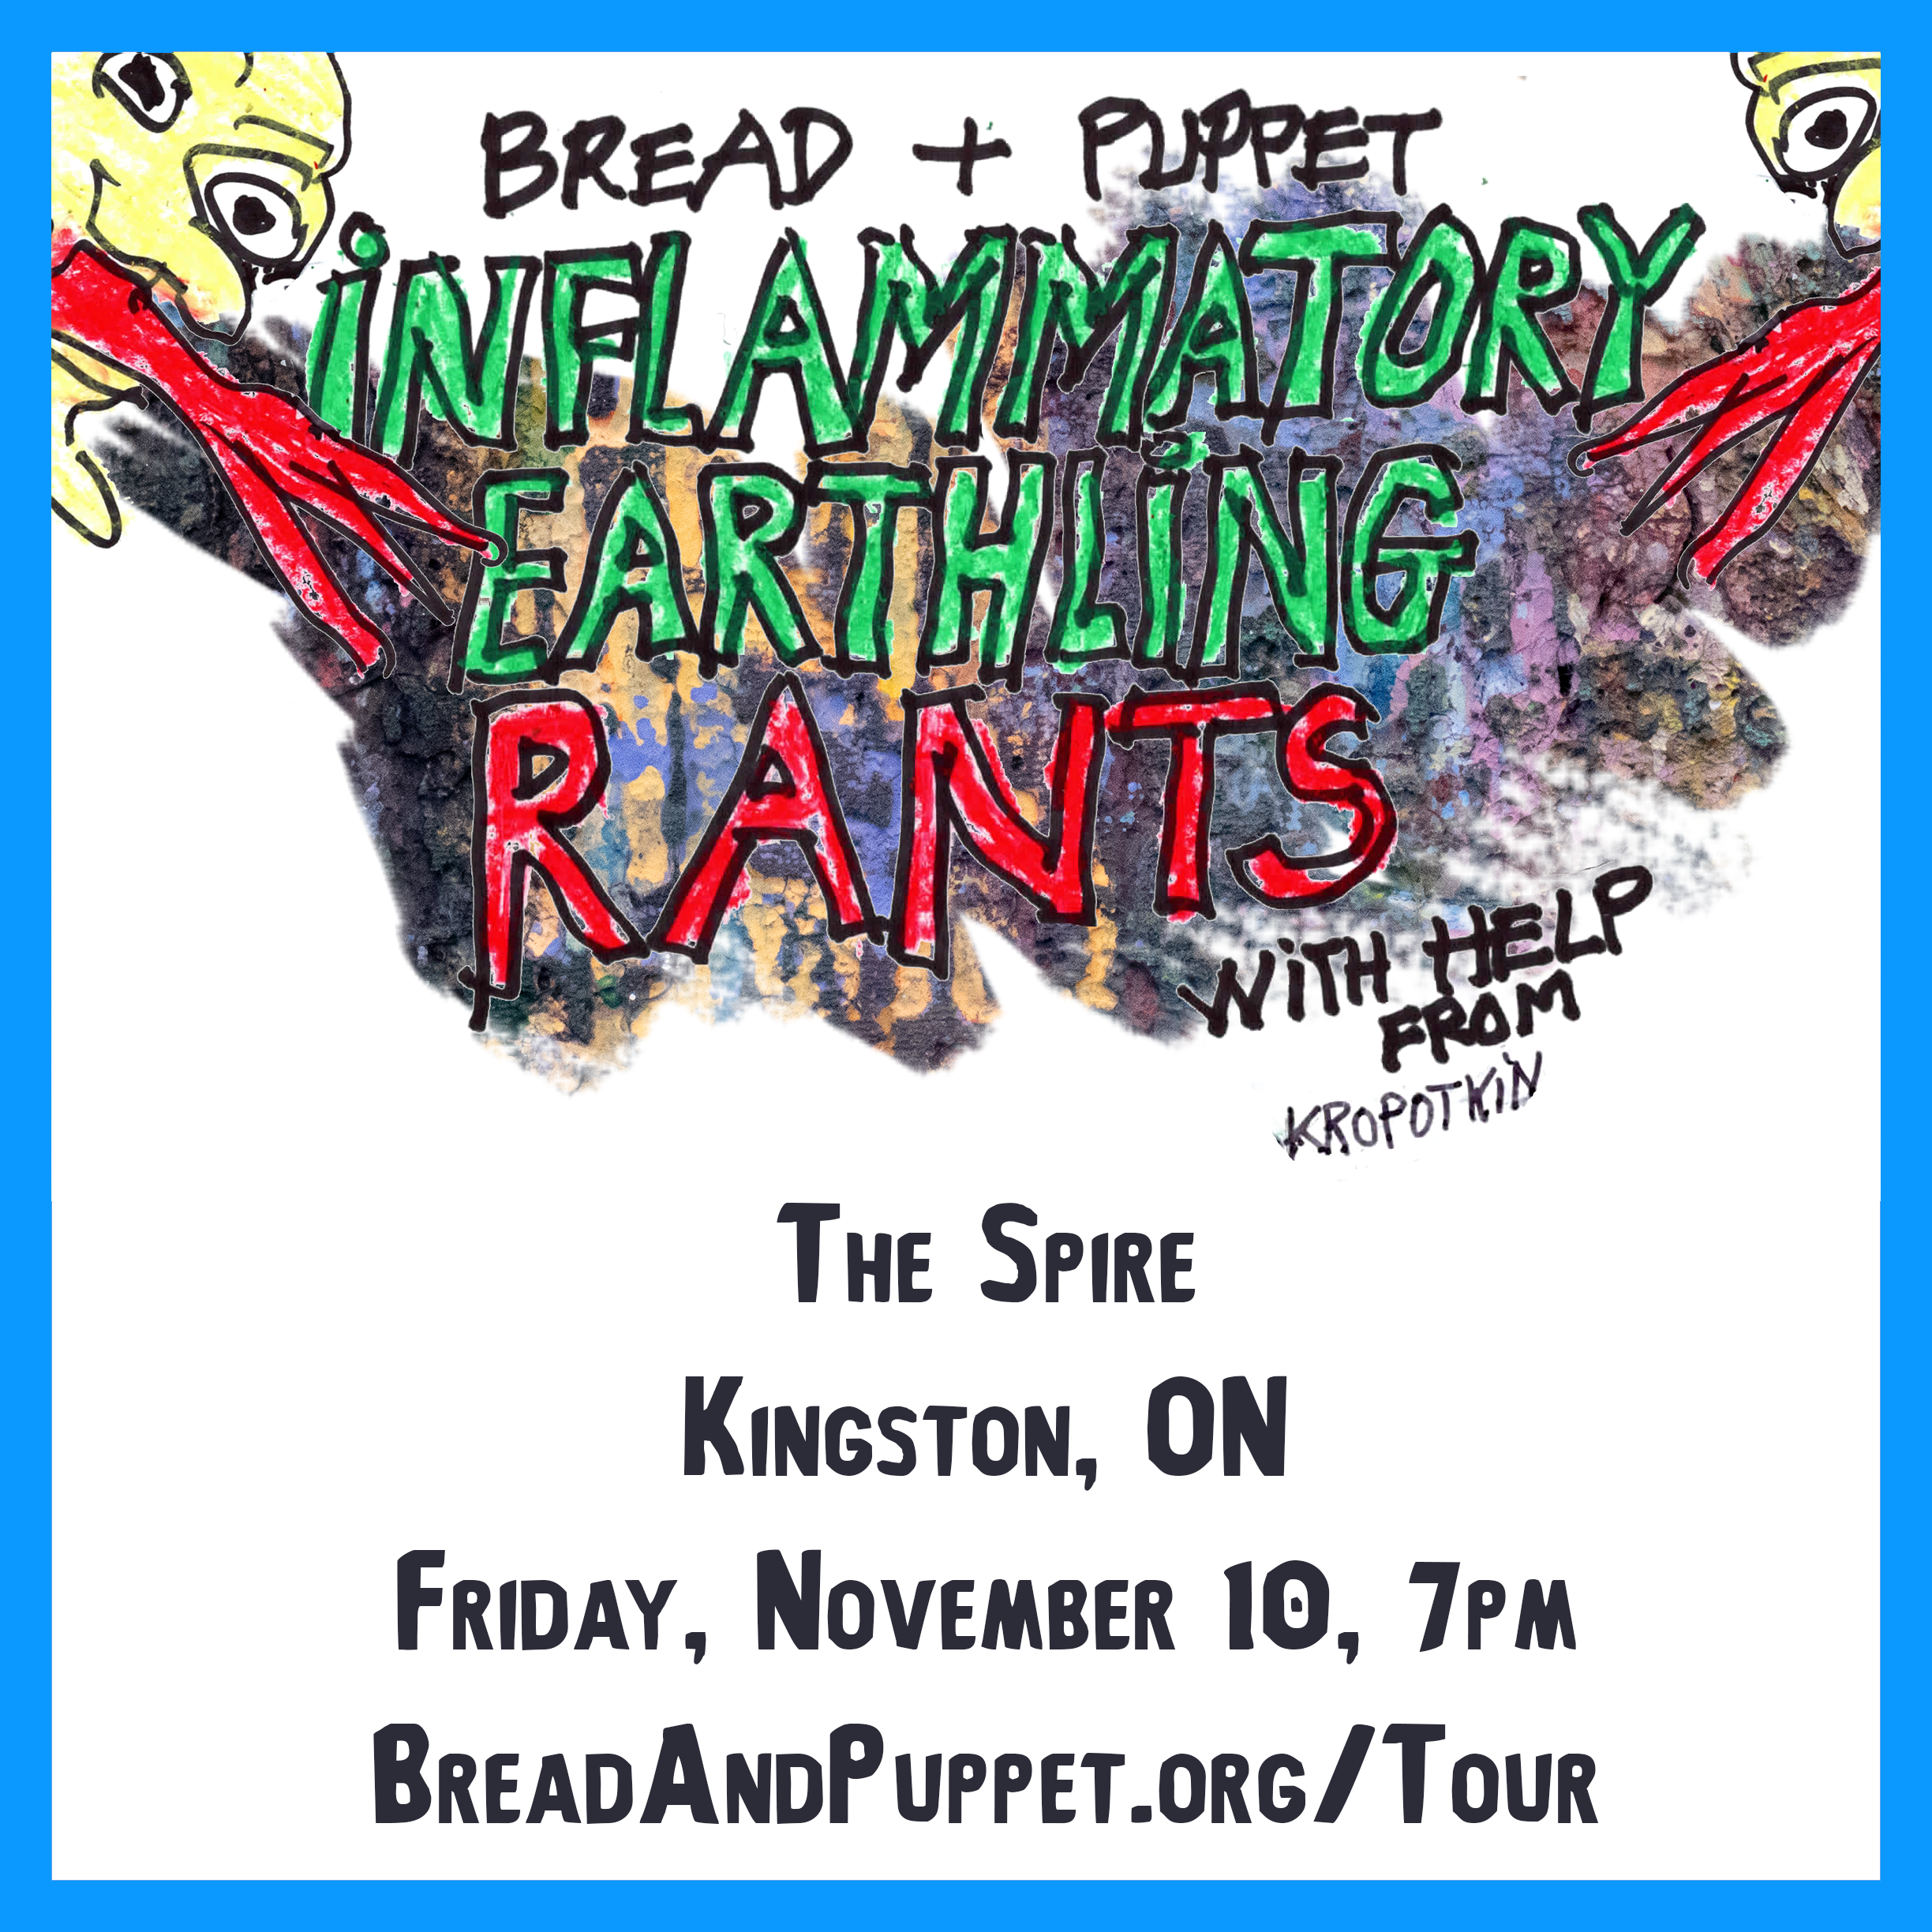 Poster for Bread and Puppet Theater's 'Inflammatory Earthling Rants with Help from Kropotkin'. Poster notes the title, location, and date/time of the show. The upper half of the poster looks as if it was drawn by crayon and depicts two monsters.